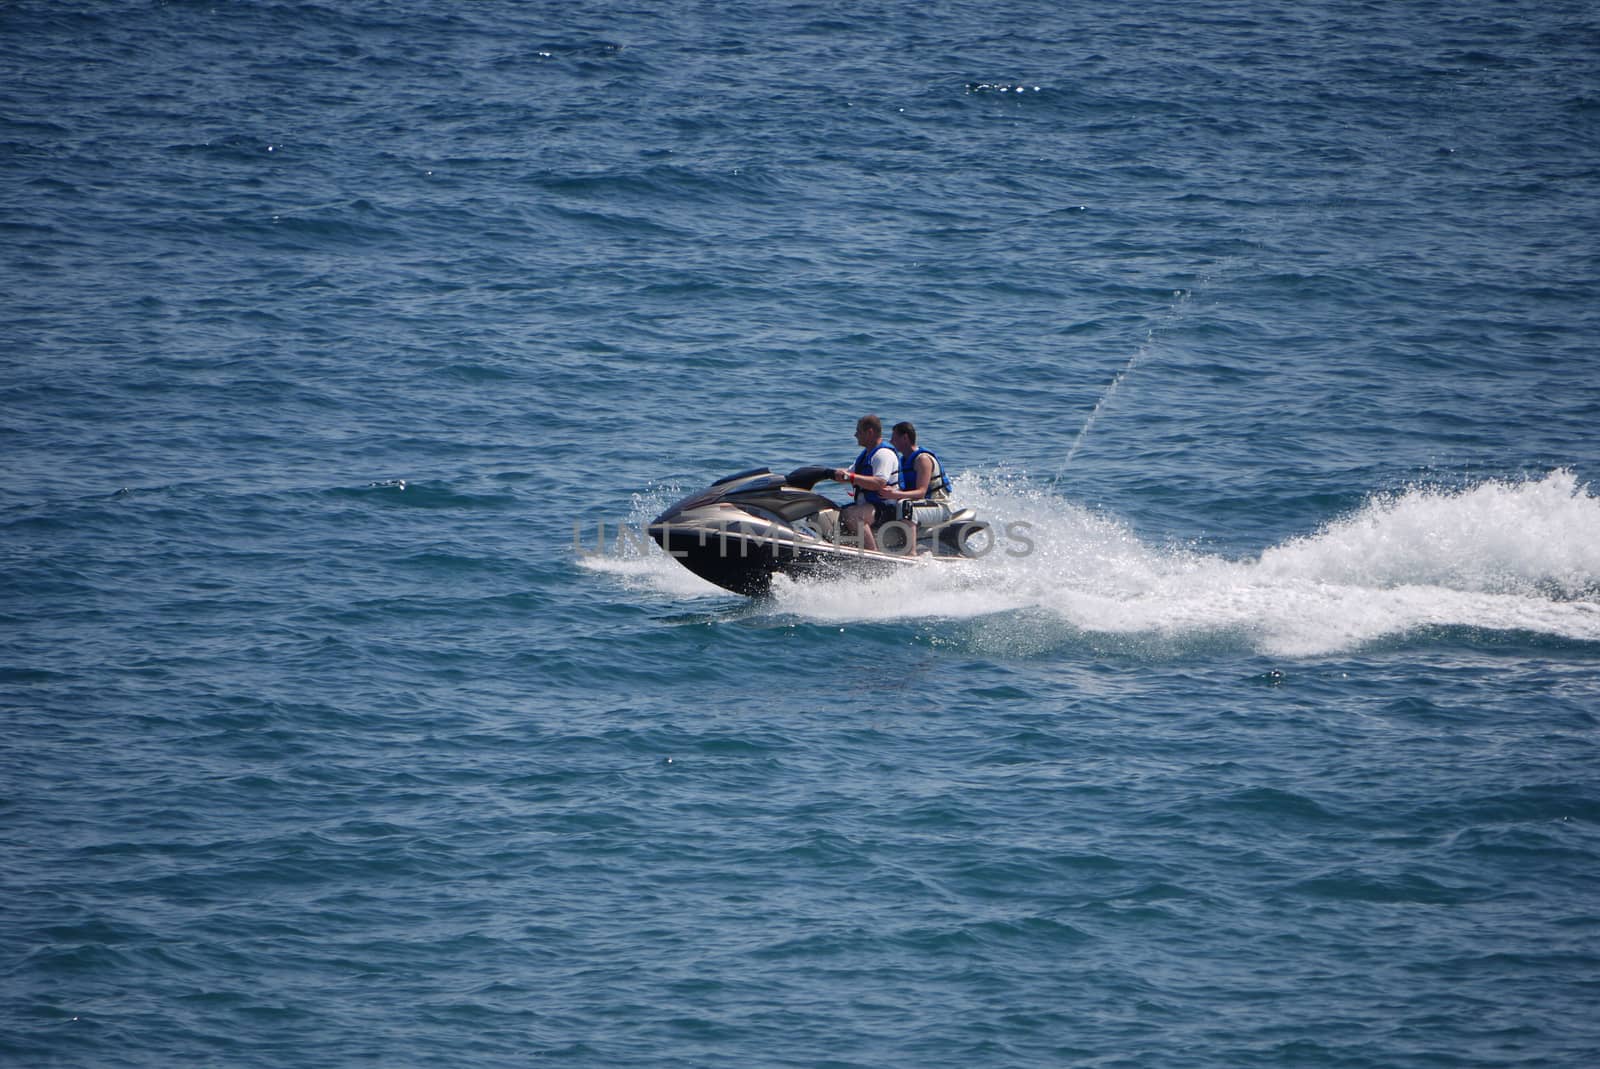 Tourists ride at great speed on a water motorcycle amid the calm waters of the sea. Dressed for safety in life jackets.